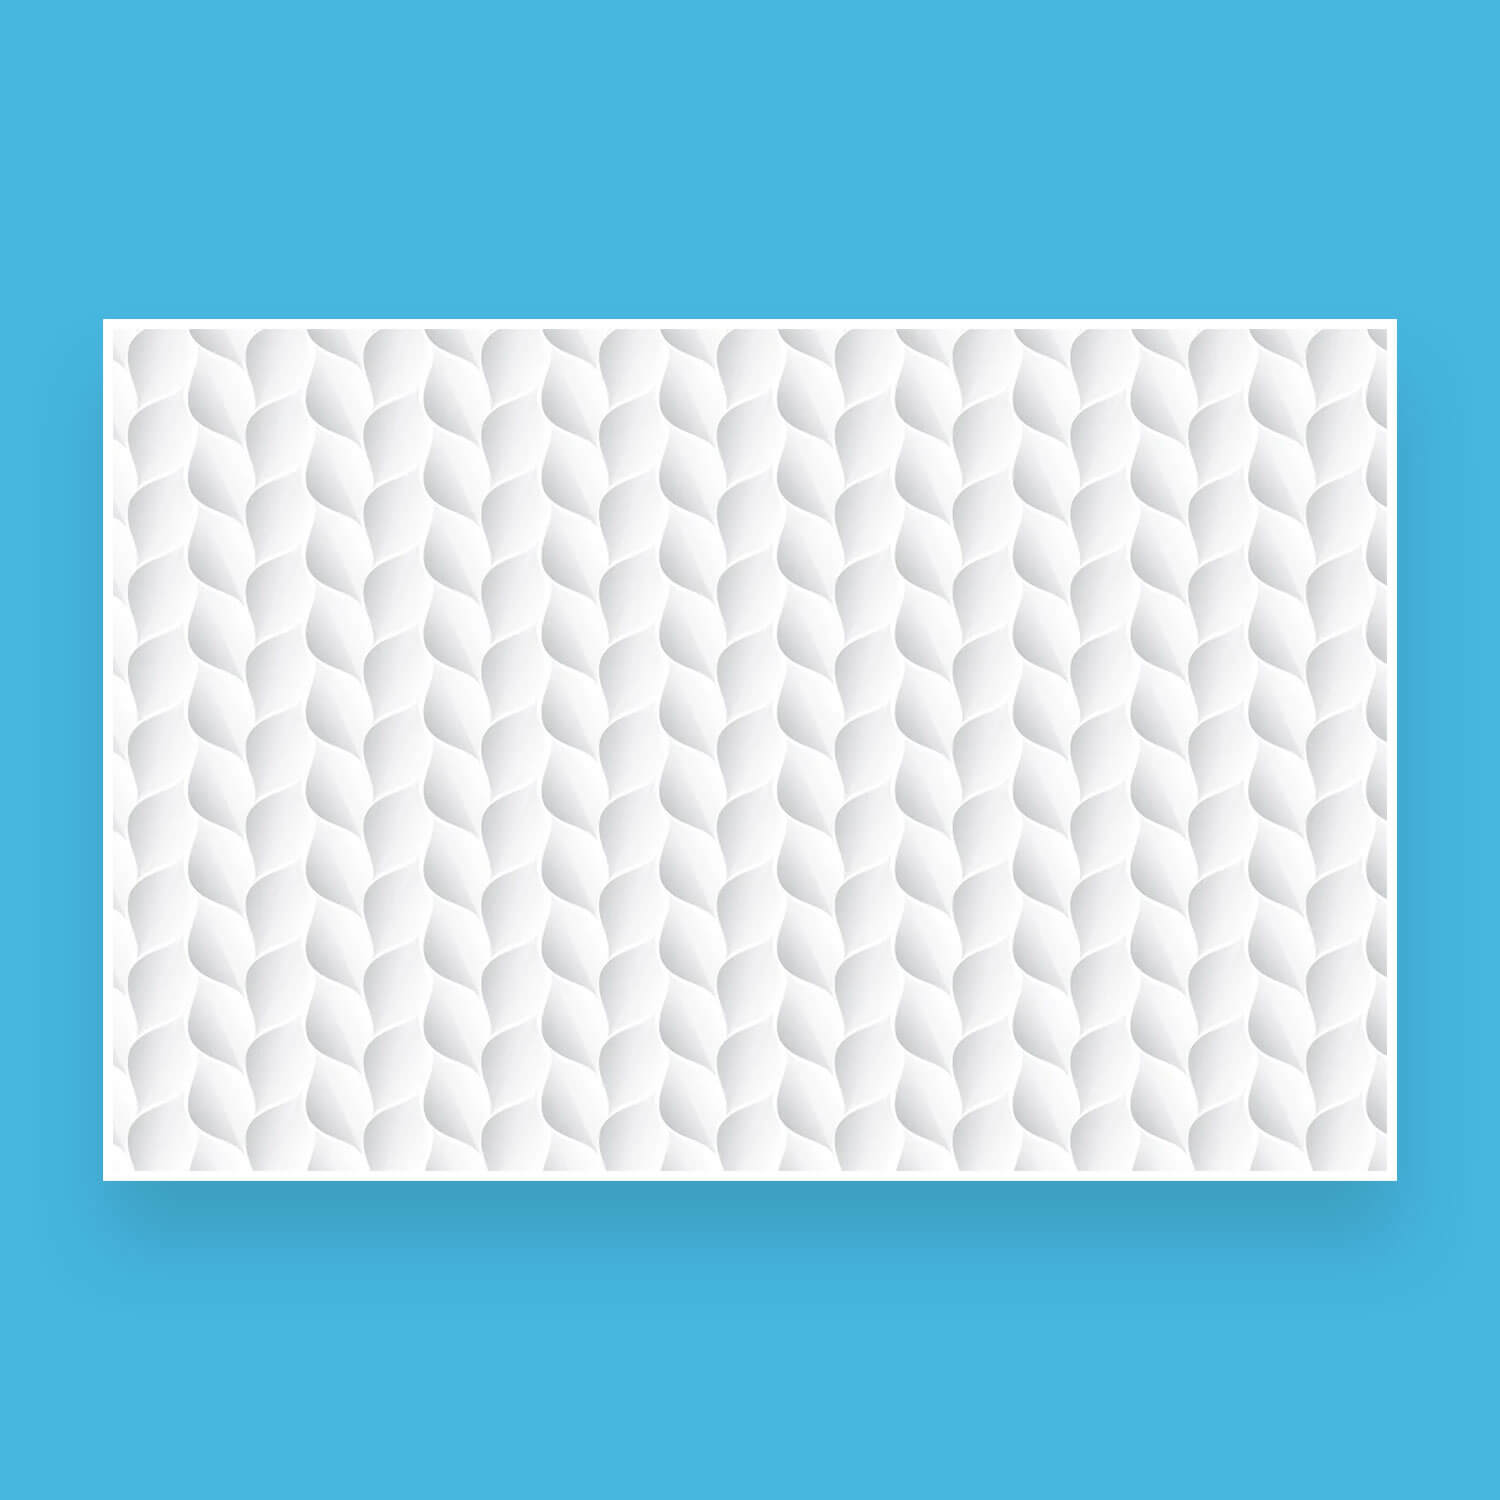 White decorative seamless texture on a turquoise background.